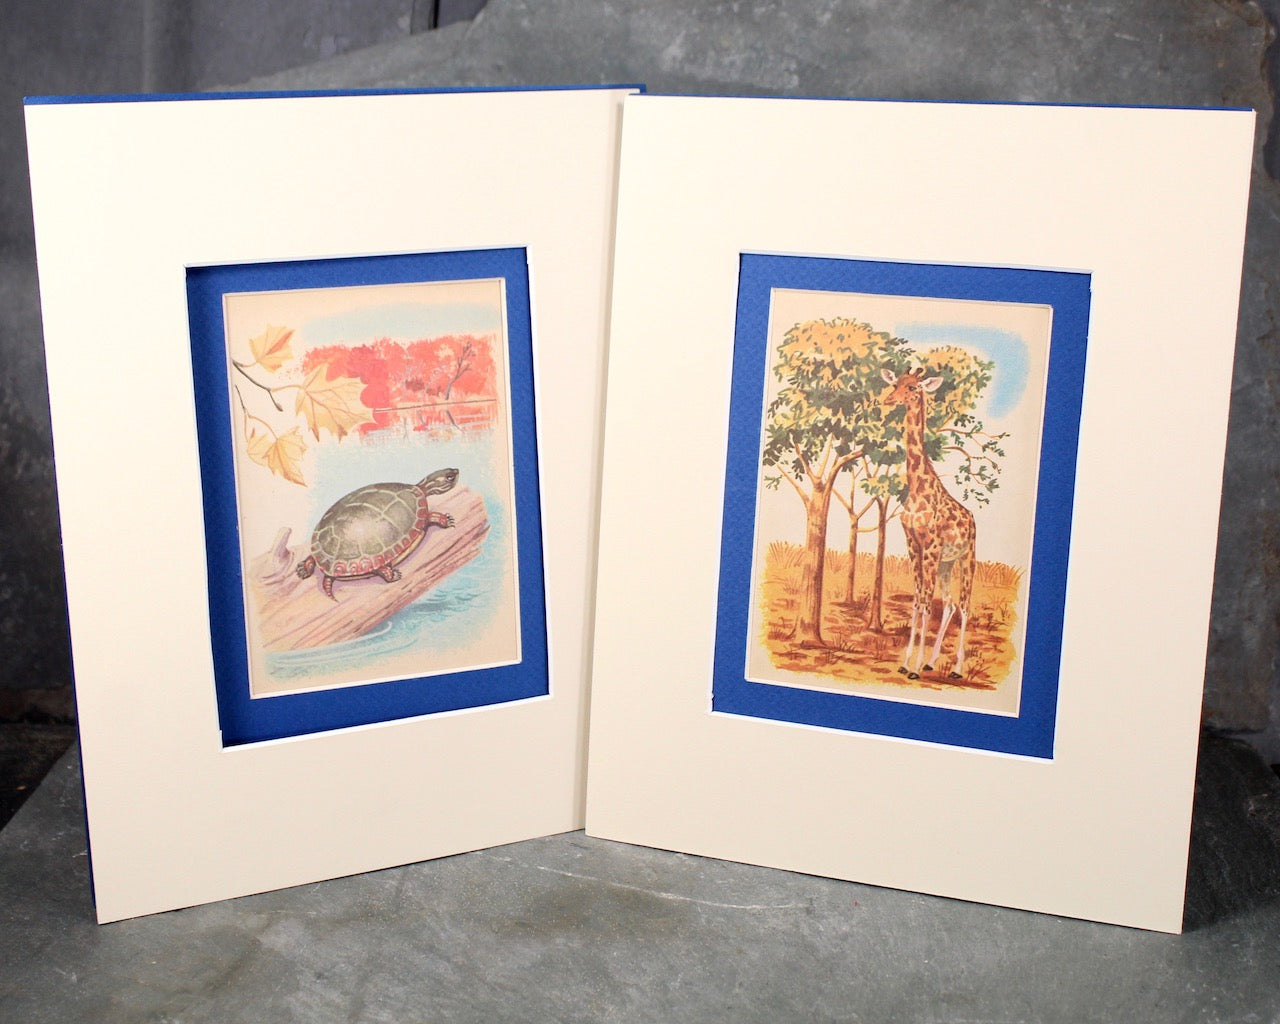 Animal Art for Children's Room - Set of 2 Matted Vintage Children's Book Pages (Not Reprints) - 8x10" MATTED, UNFRAMED